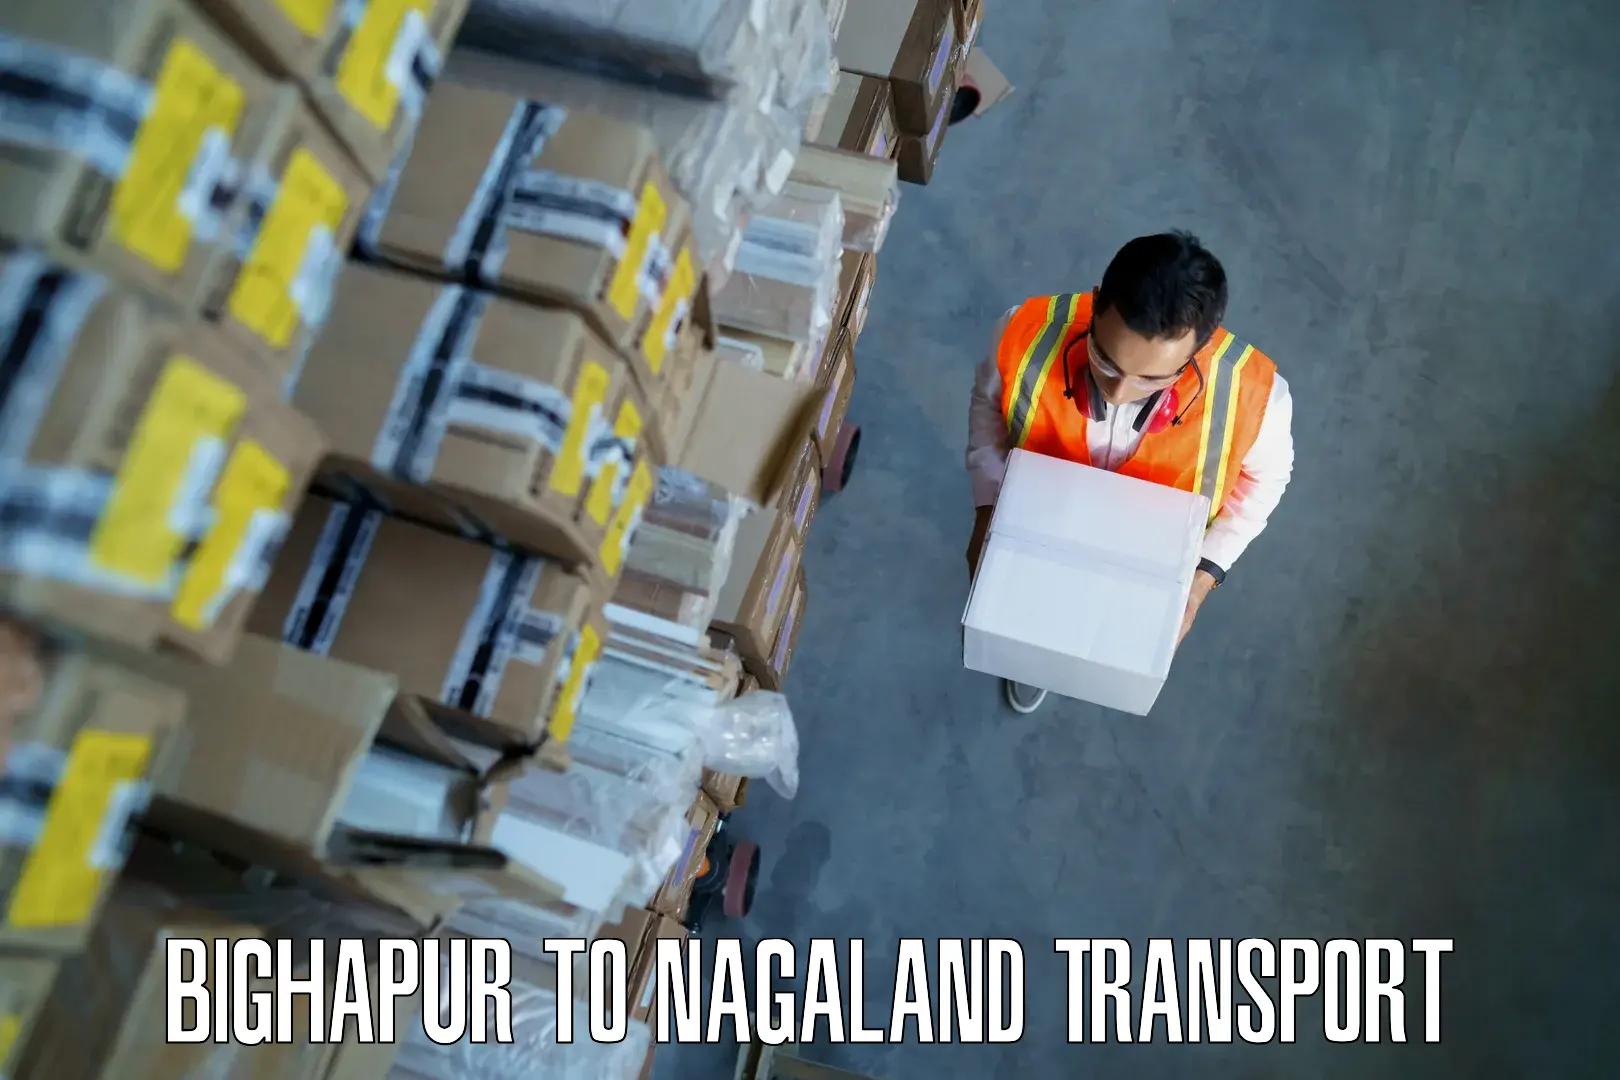 Delivery service Bighapur to NIT Nagaland